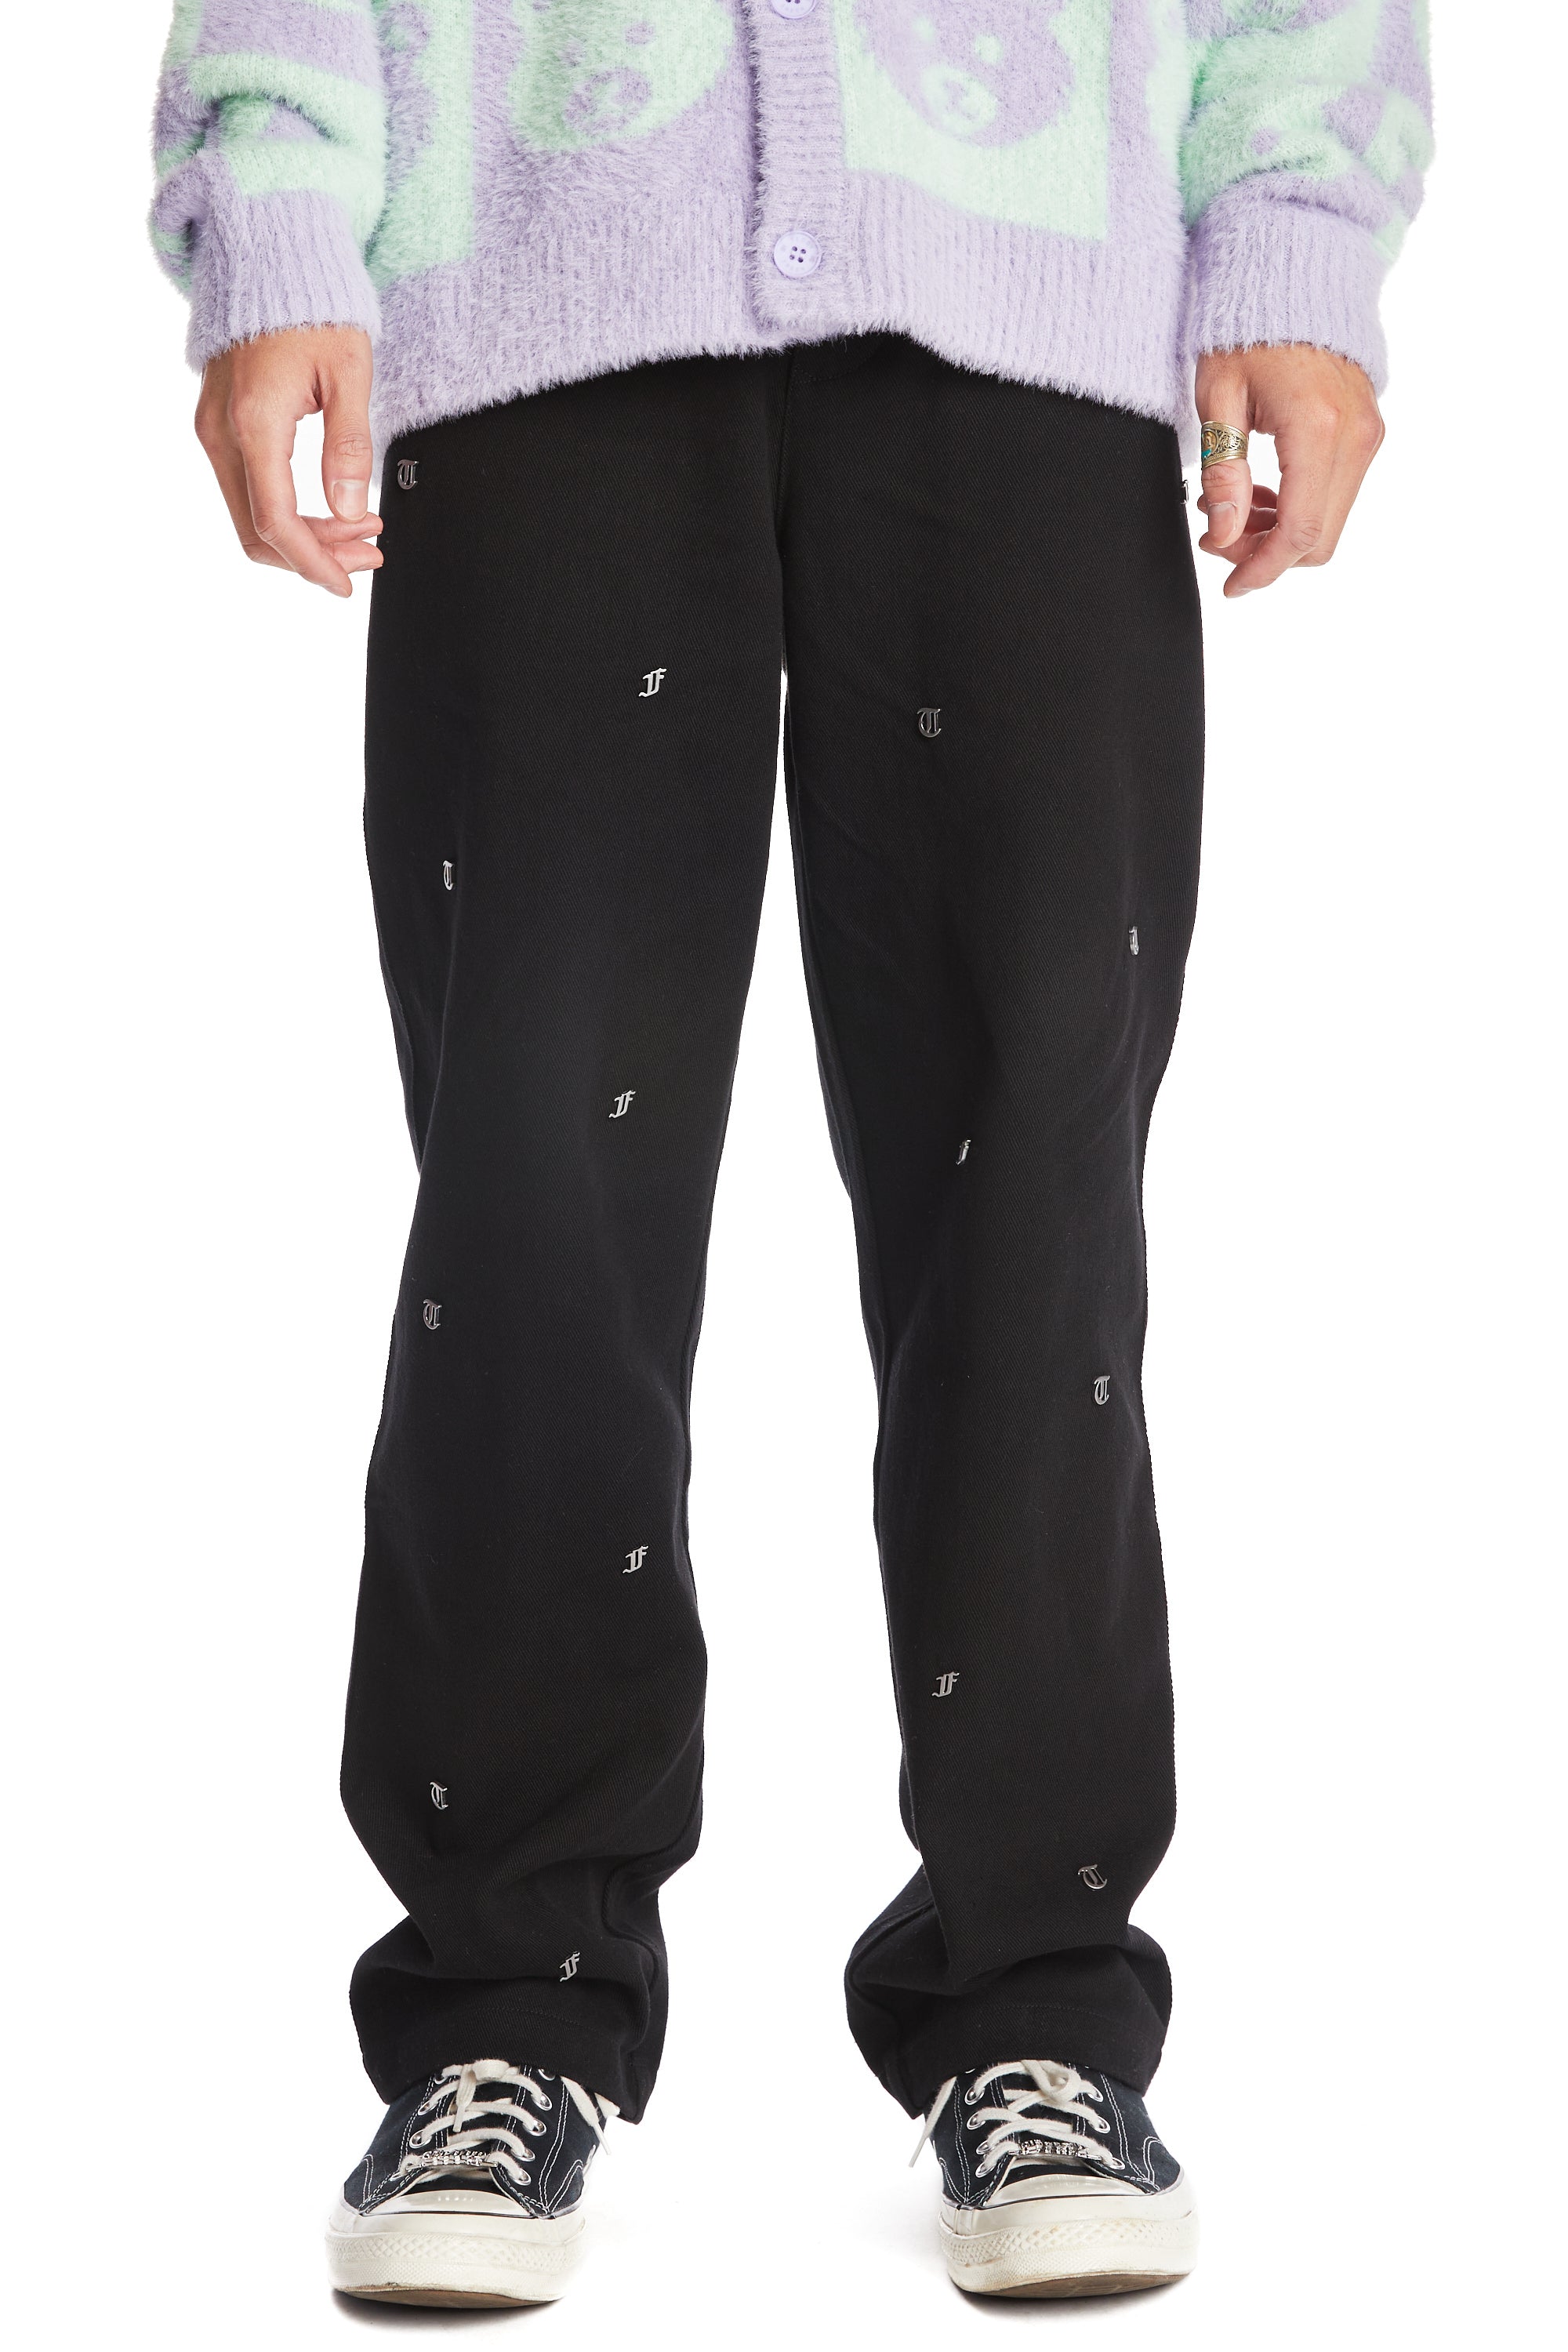 Teddy Fresh Cozy Quilted Sweatpants